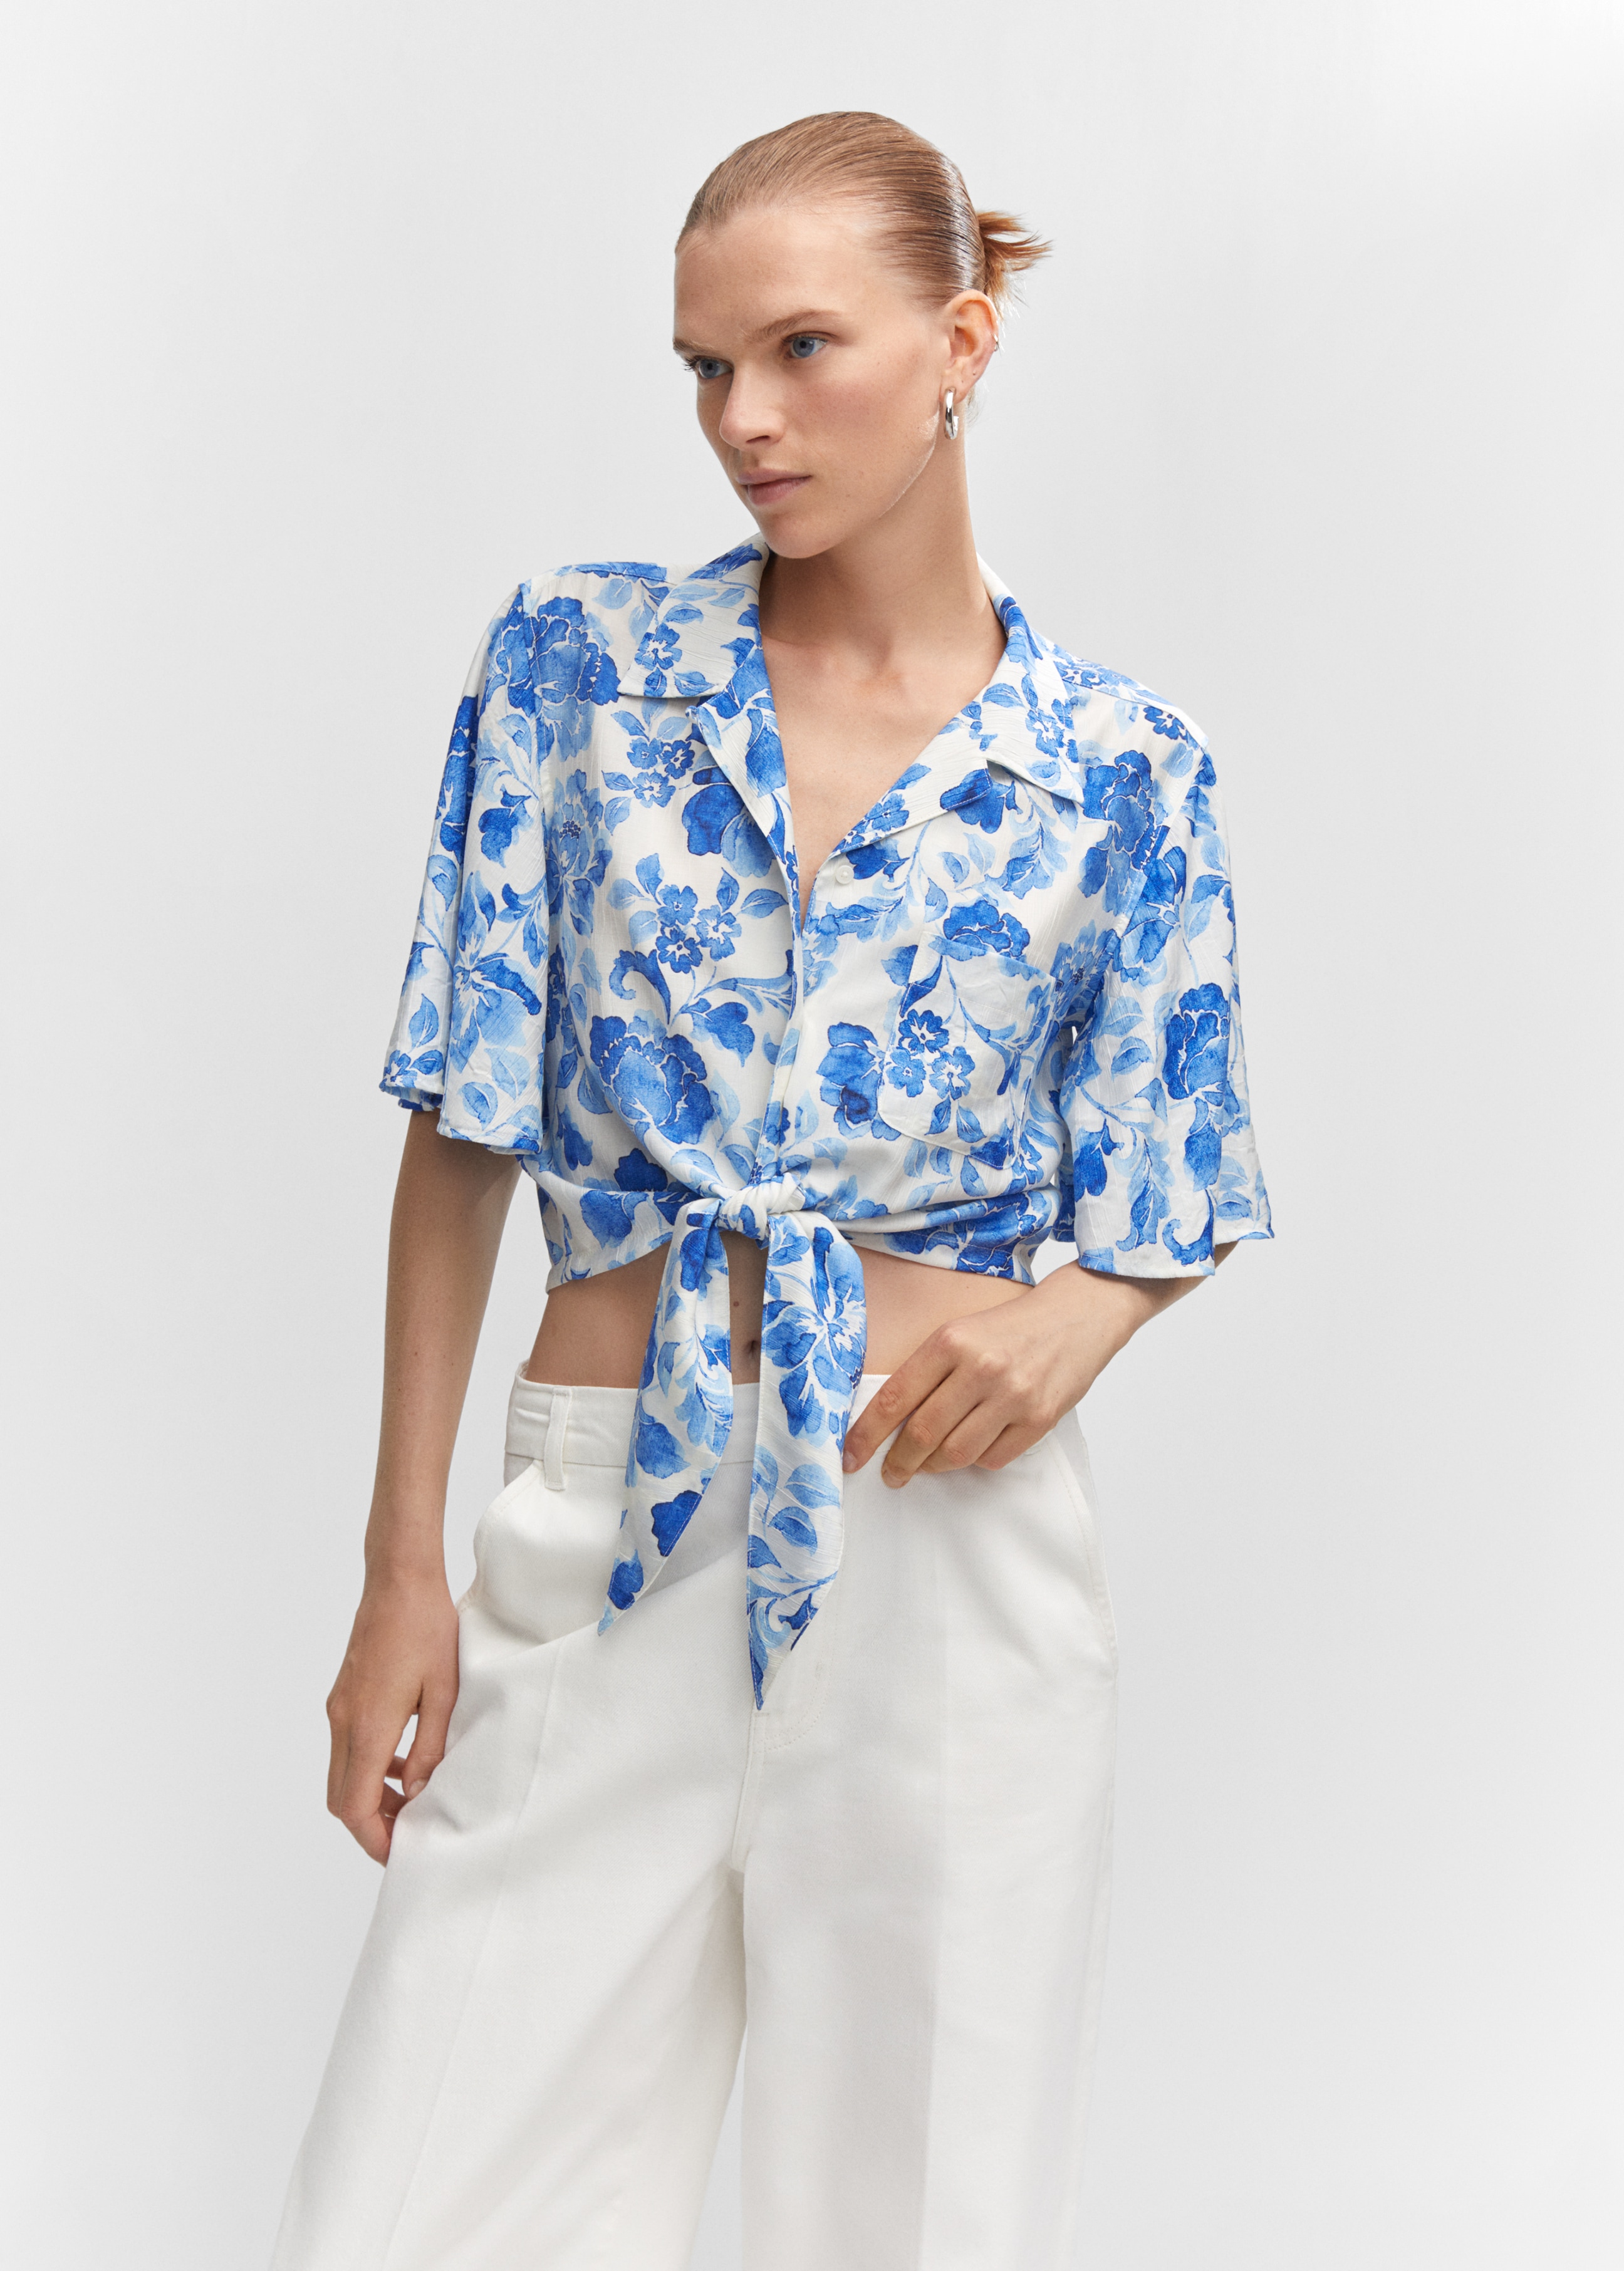 Floral shirt with knot - Medium plane